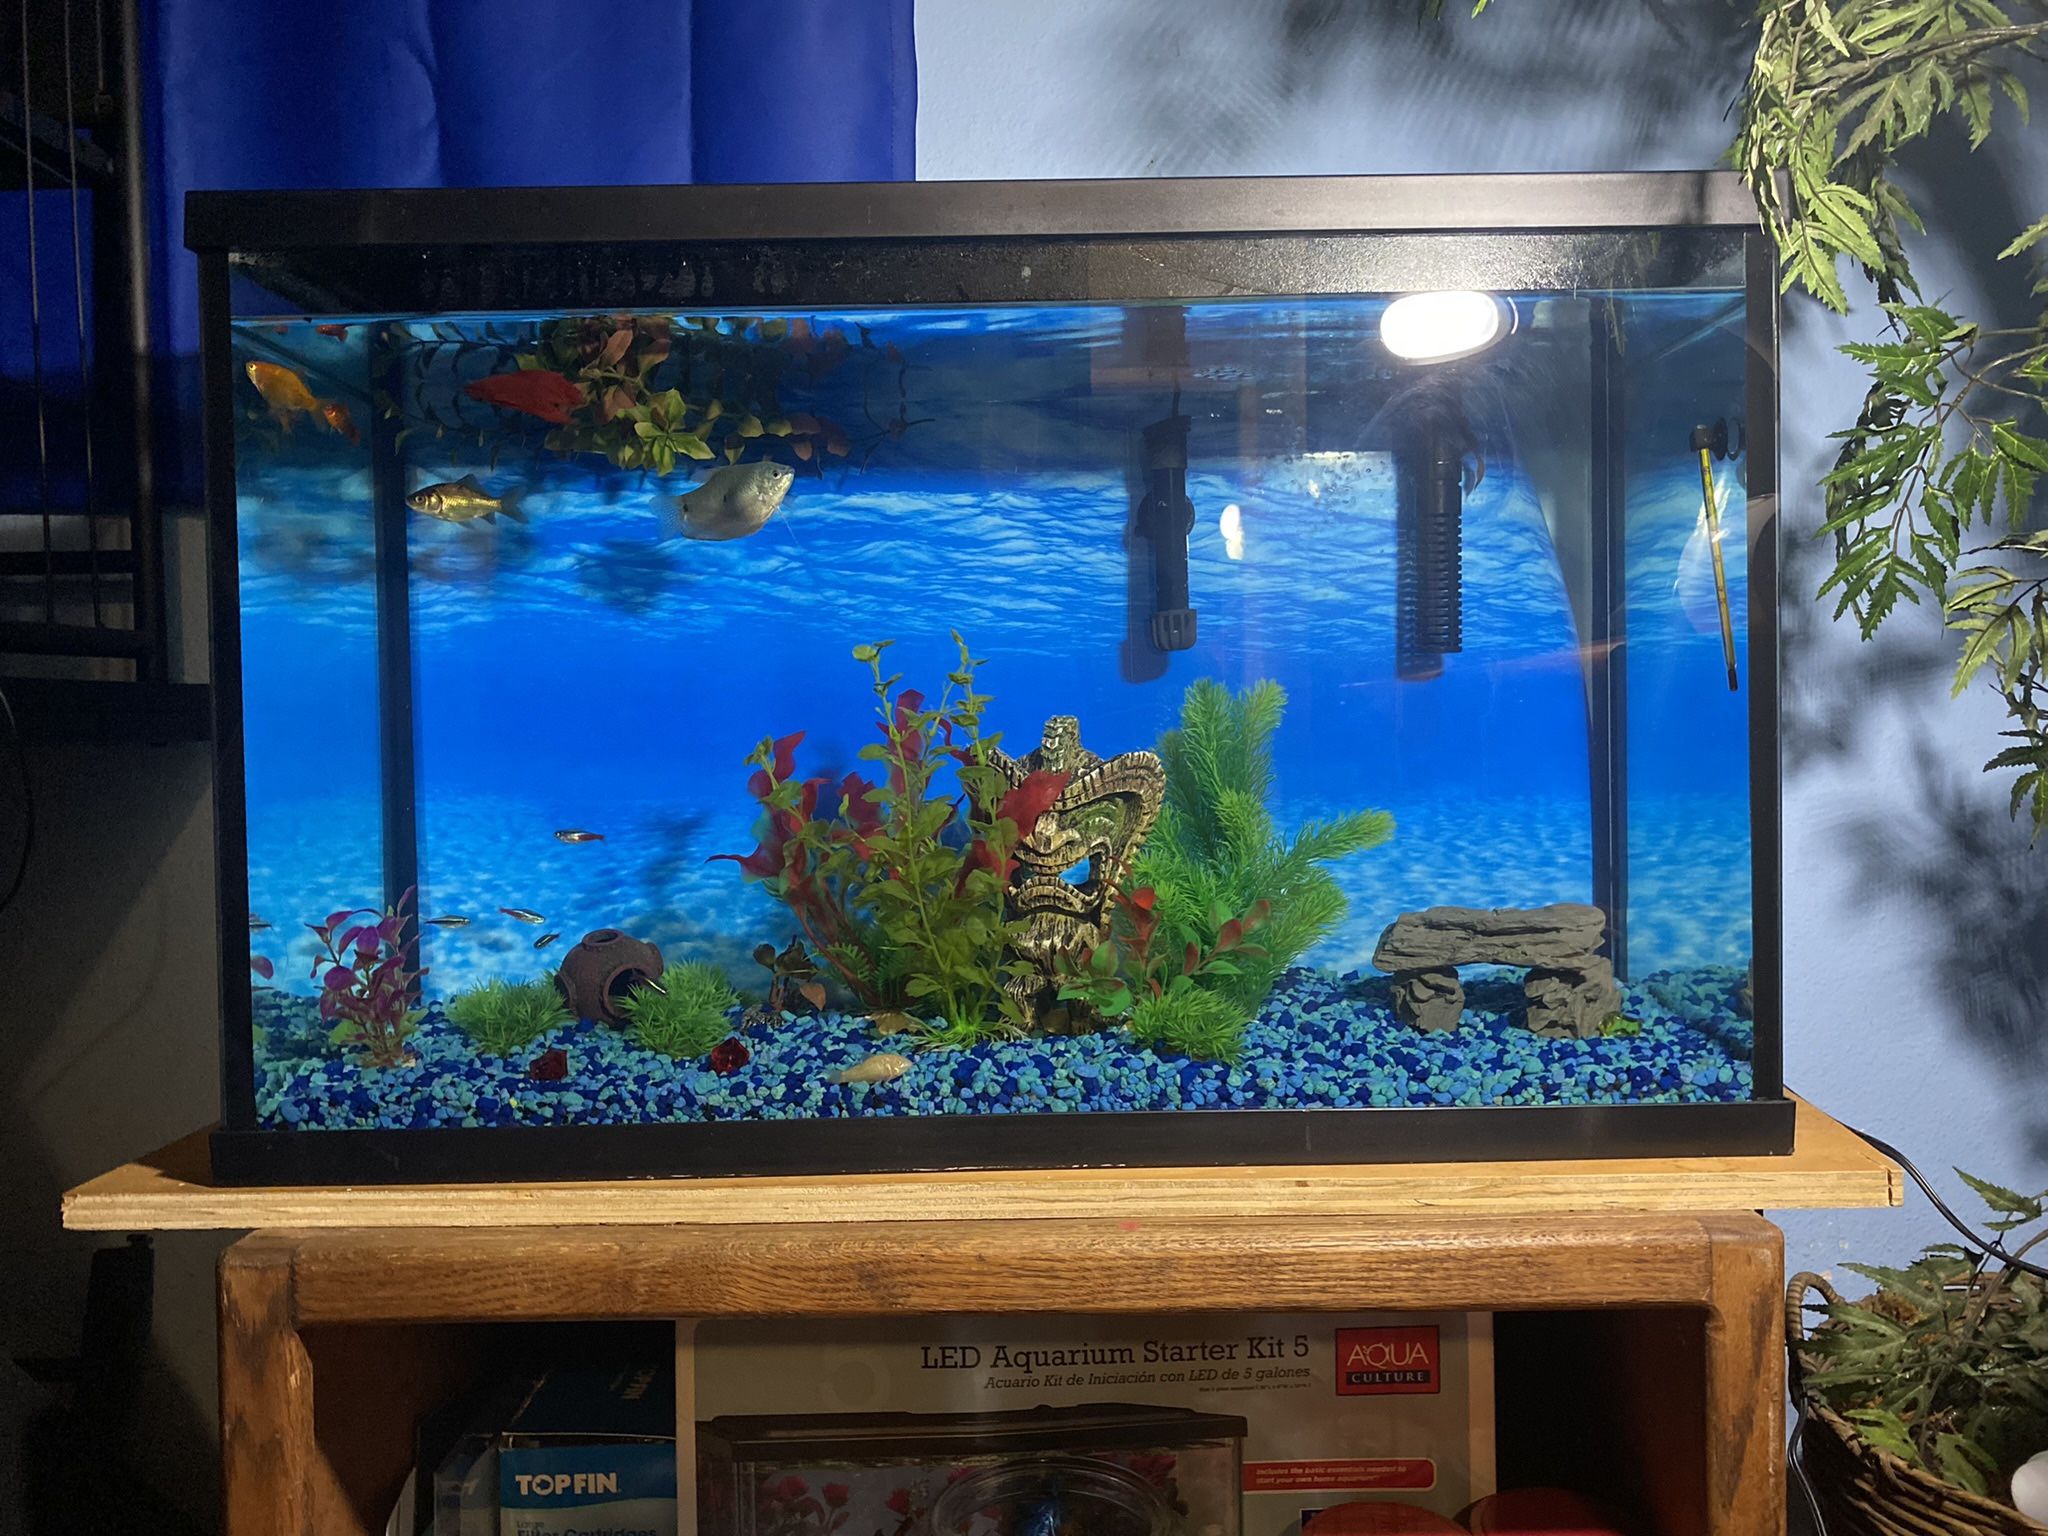 40 Gal Fish Tank with Filter, Heater, and Bubbles